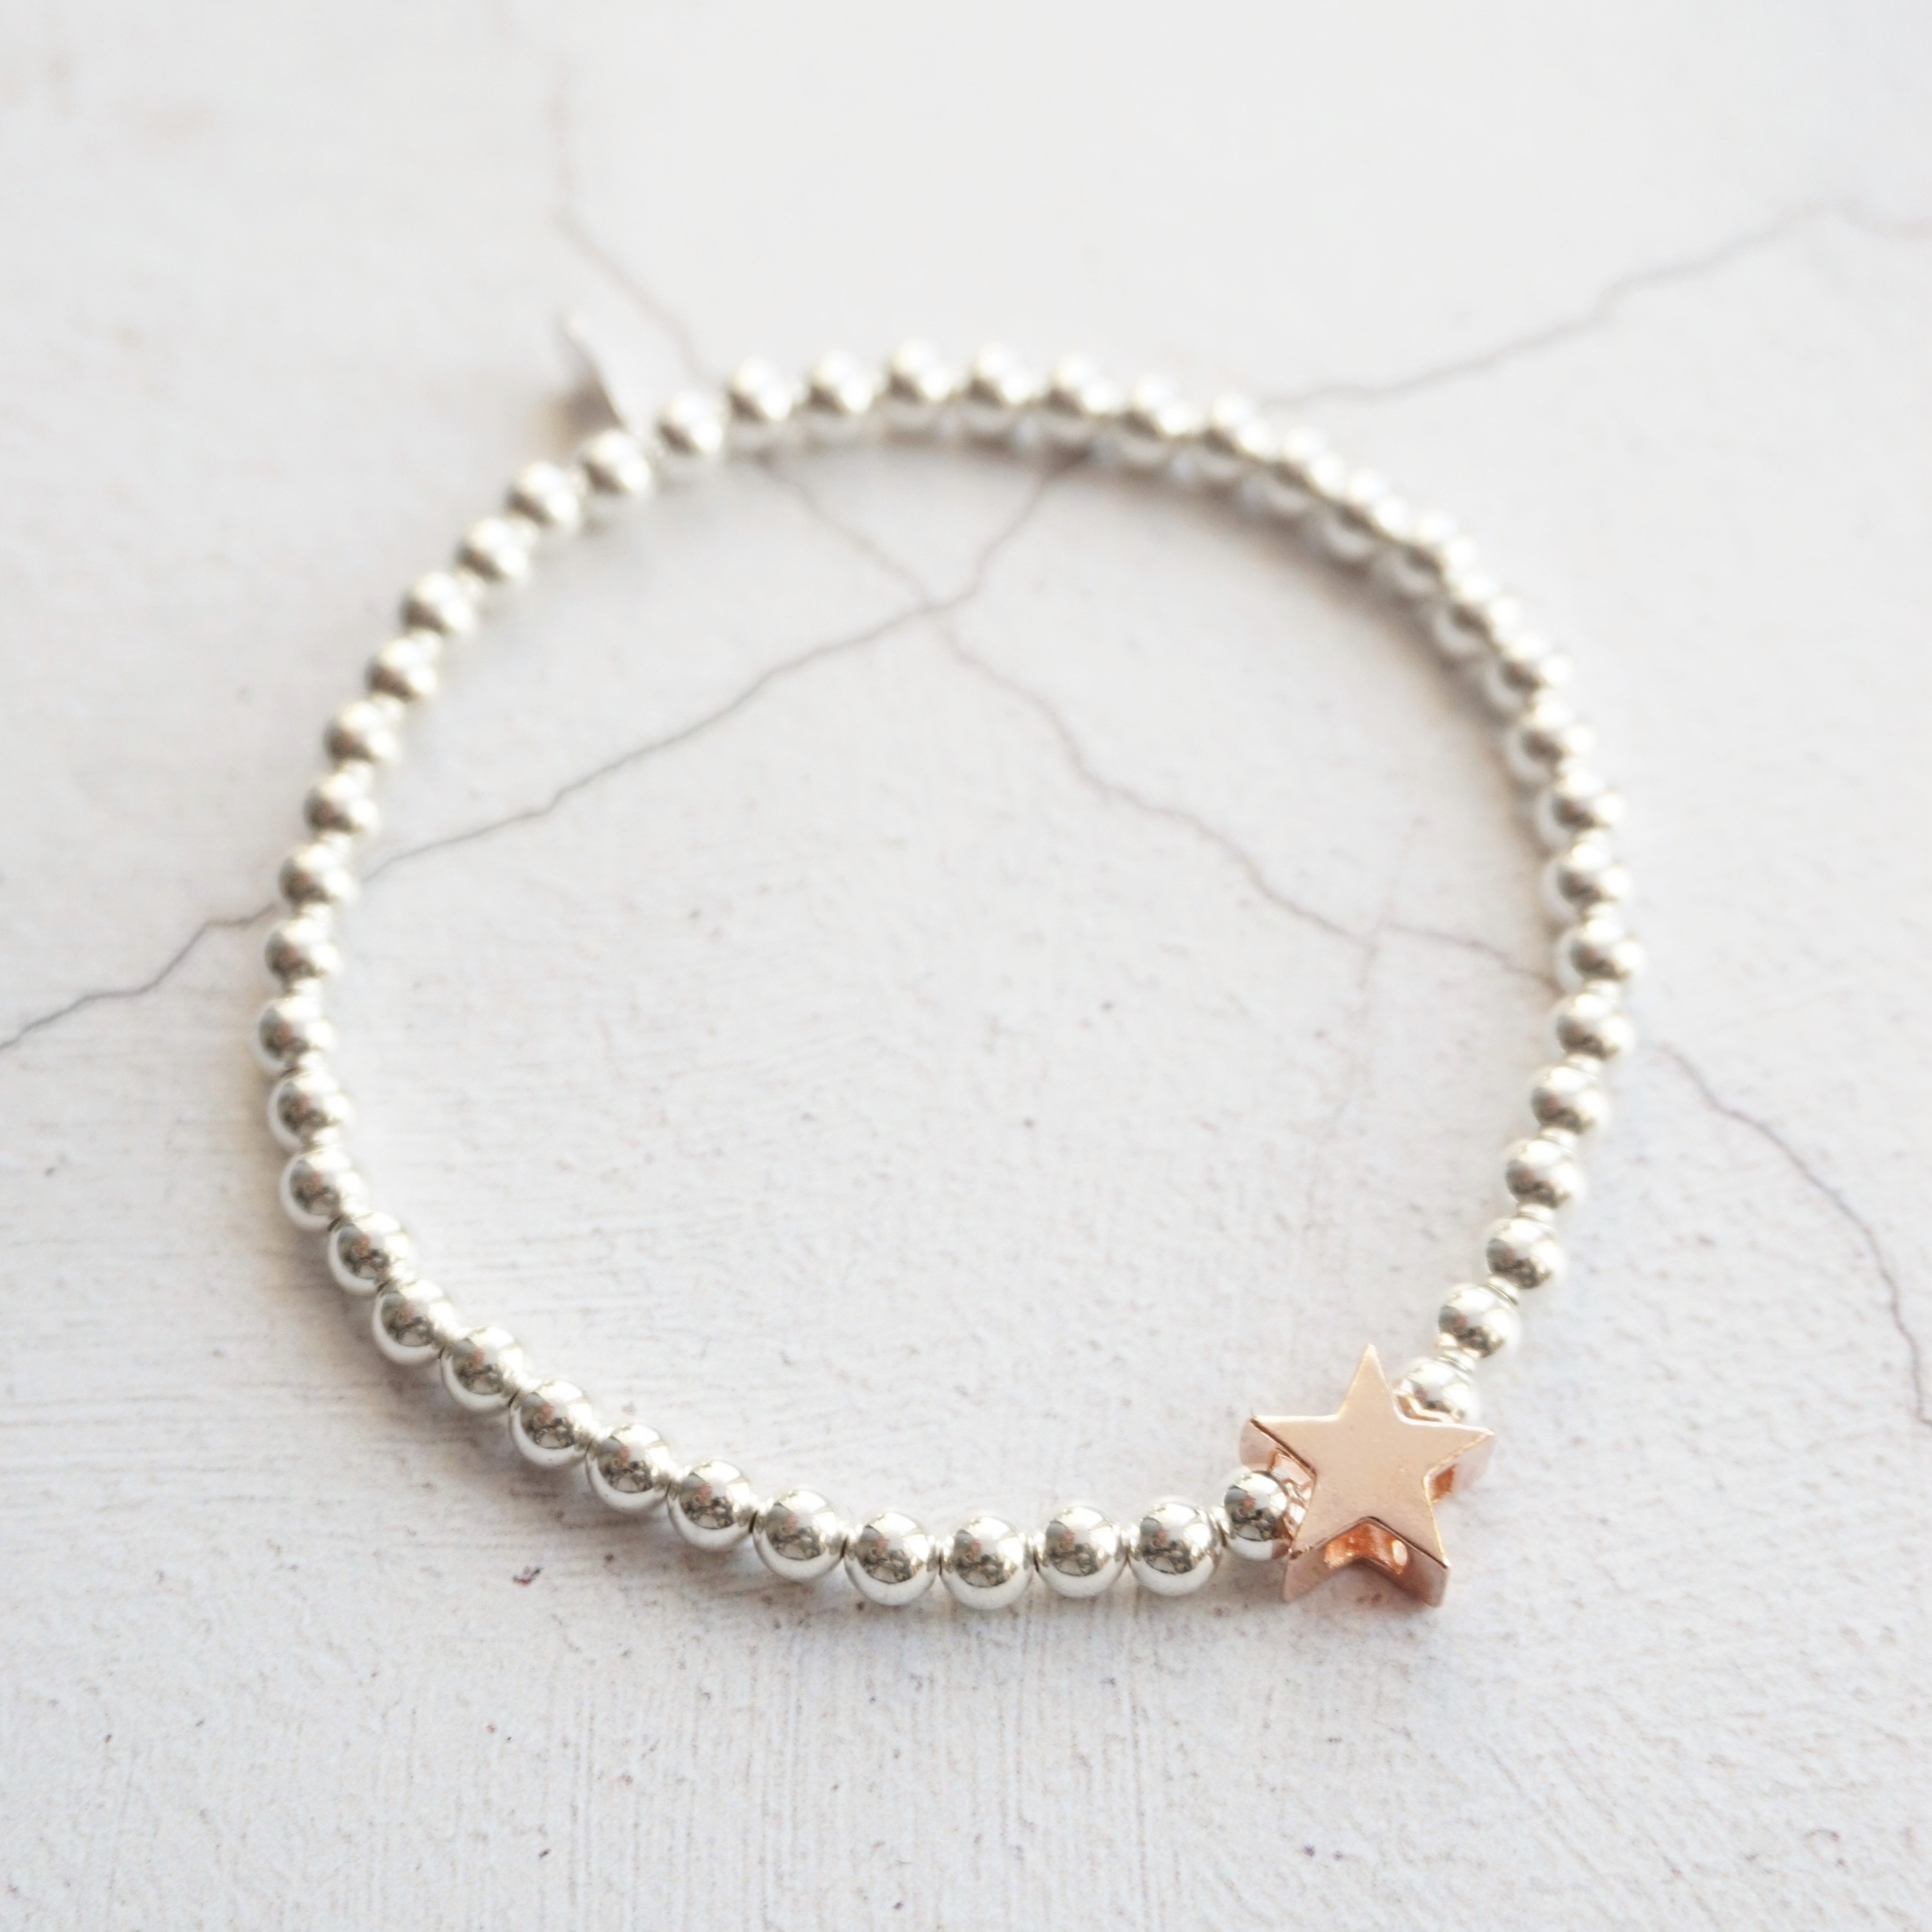 sterling silver bracelet with rose gold star bead